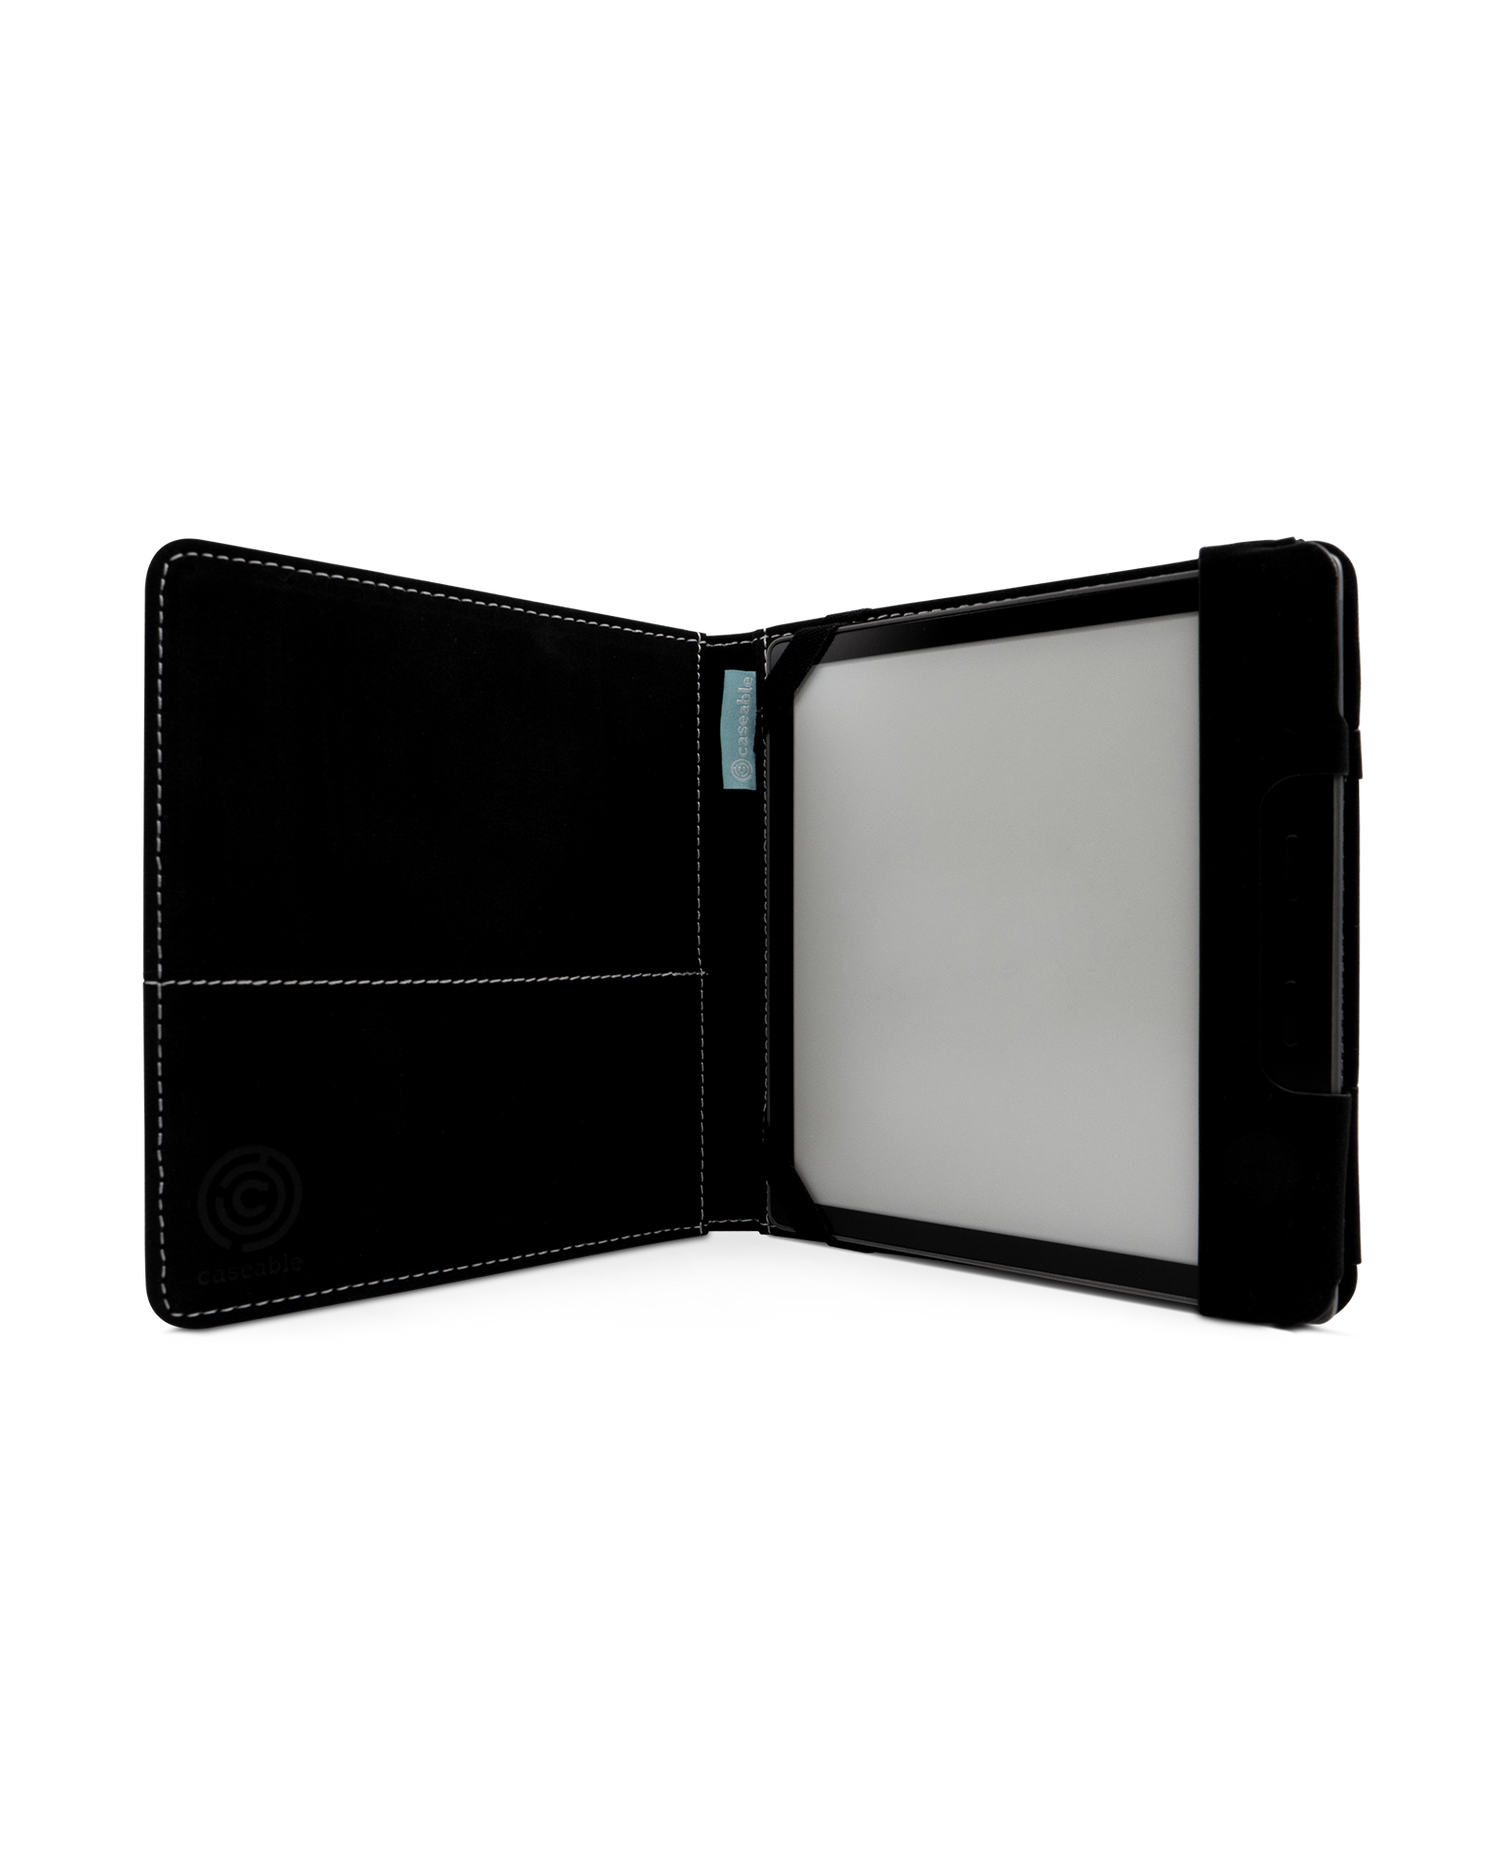 Fences Pattern eReader Case for tolino vision 6: Opened interior view